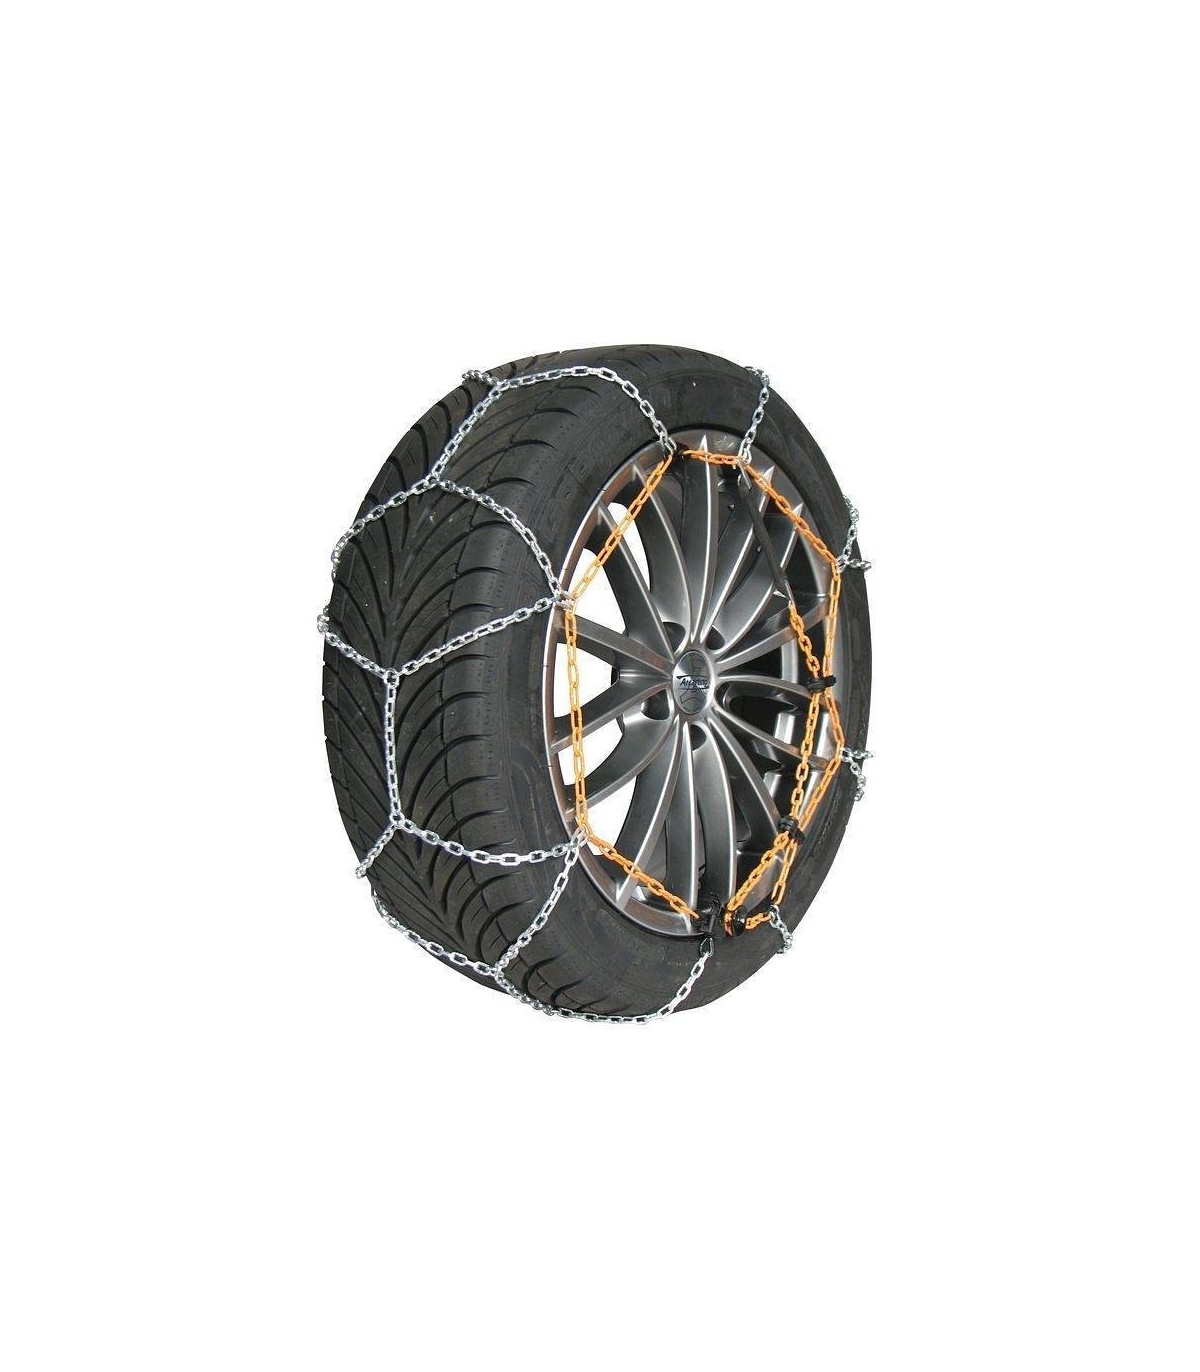 Chaines neige manuelle 9mm 245/40 R19